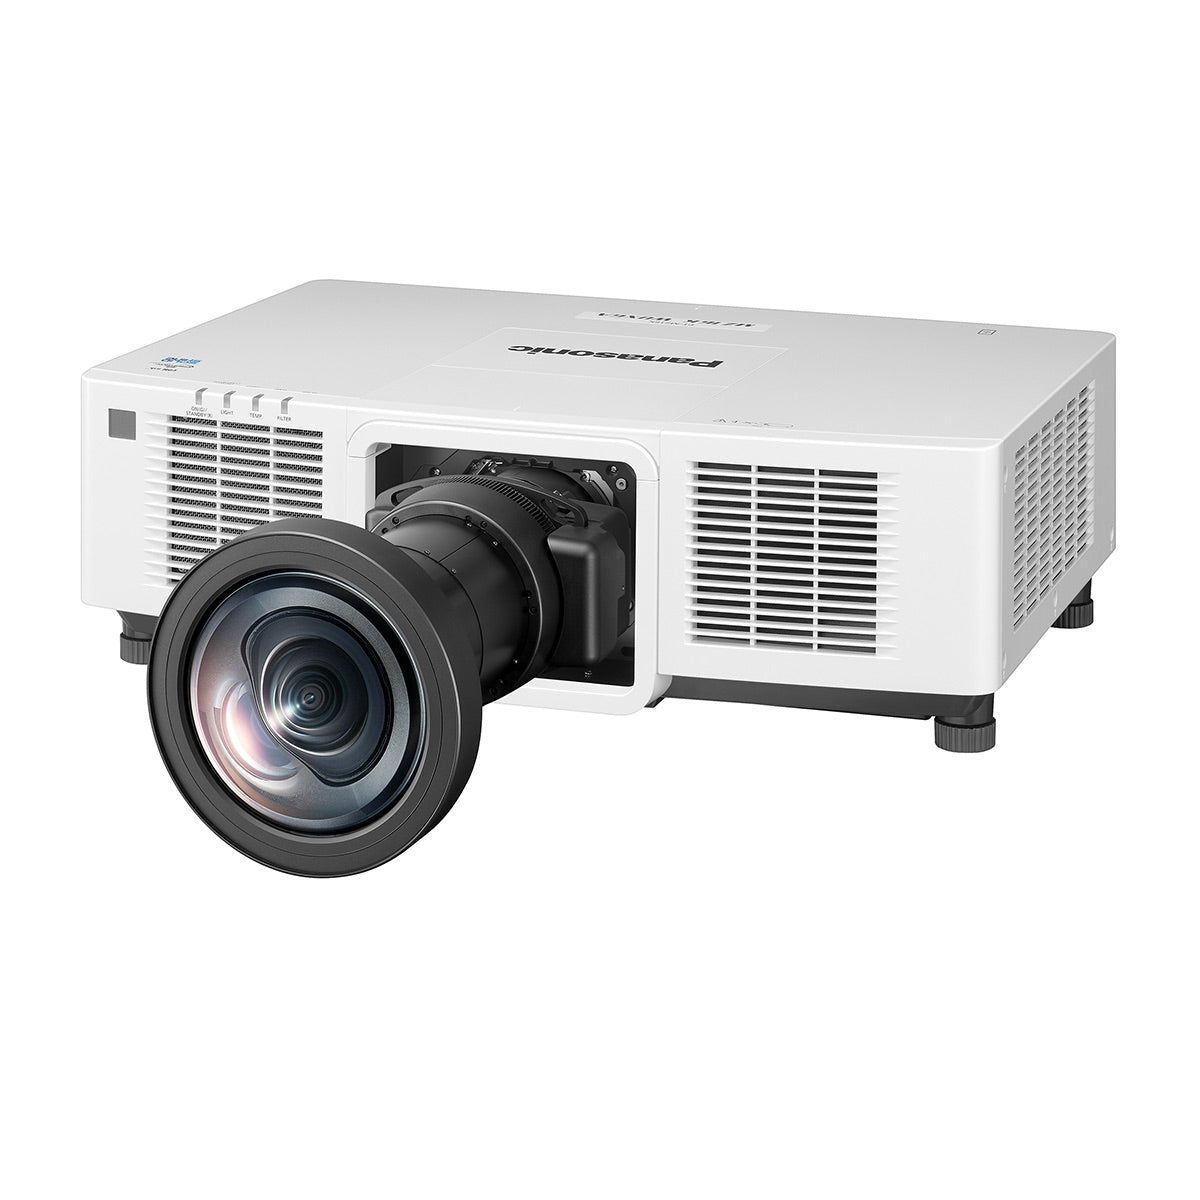 Panasonic ET-EMU100 Ultra Short-Throw Projector Zoom Lens 0.33–0.35:1, mounted on a PT-MZ16K projector